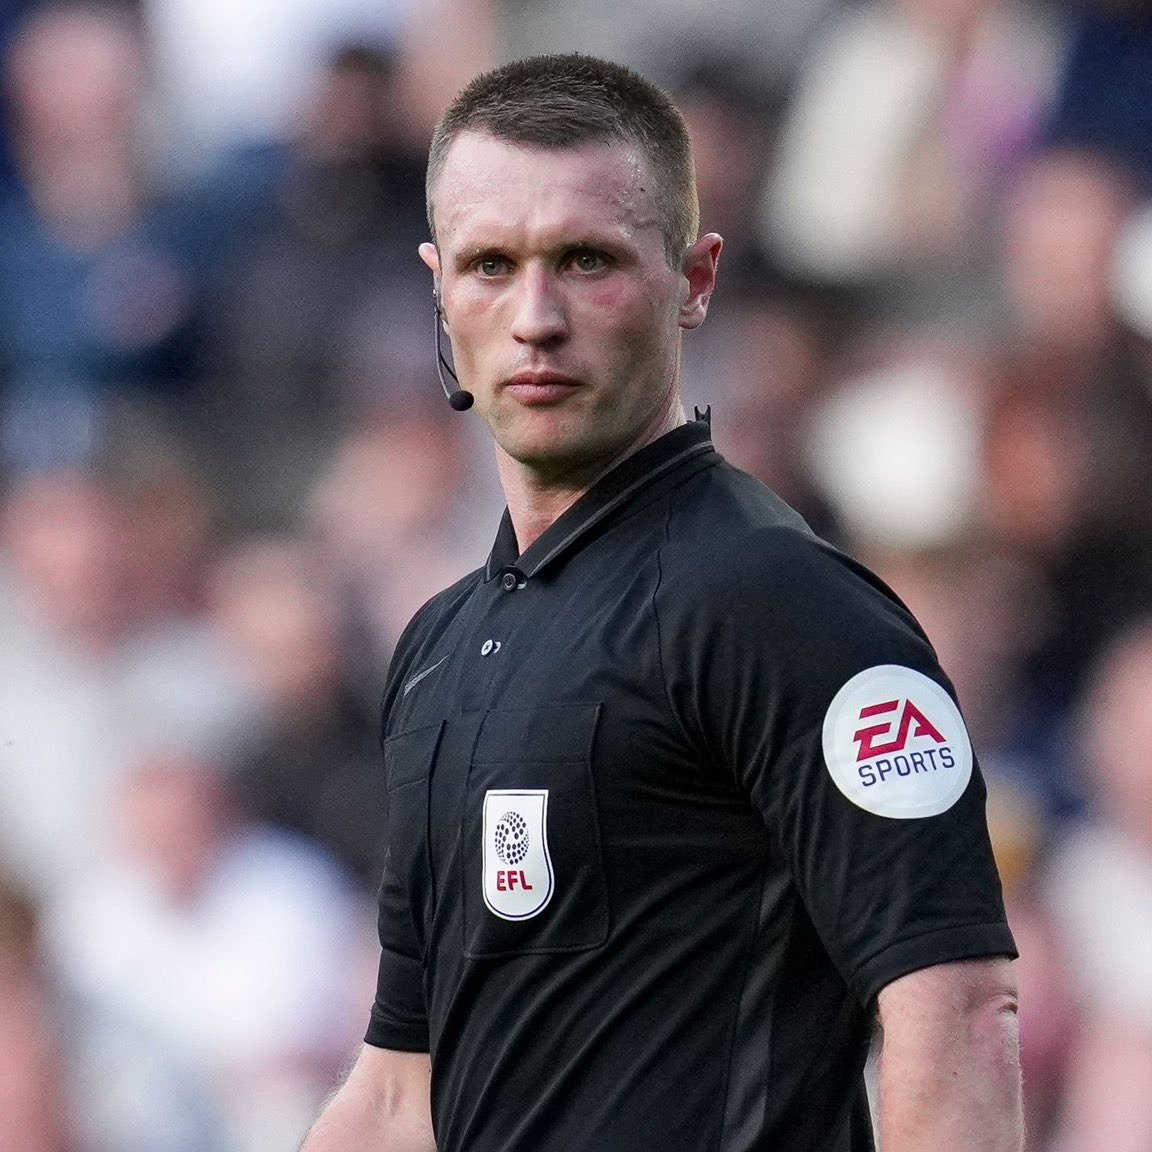 Thomas Bramall will referee Saturday's game between Wolves and Crystal Palace with Michael Salisbury on VAR duty. Bramall has refereed three Wolves games this season (W2, D1), including the FA Cup victory over West Brom. #WWFC | #Wolves